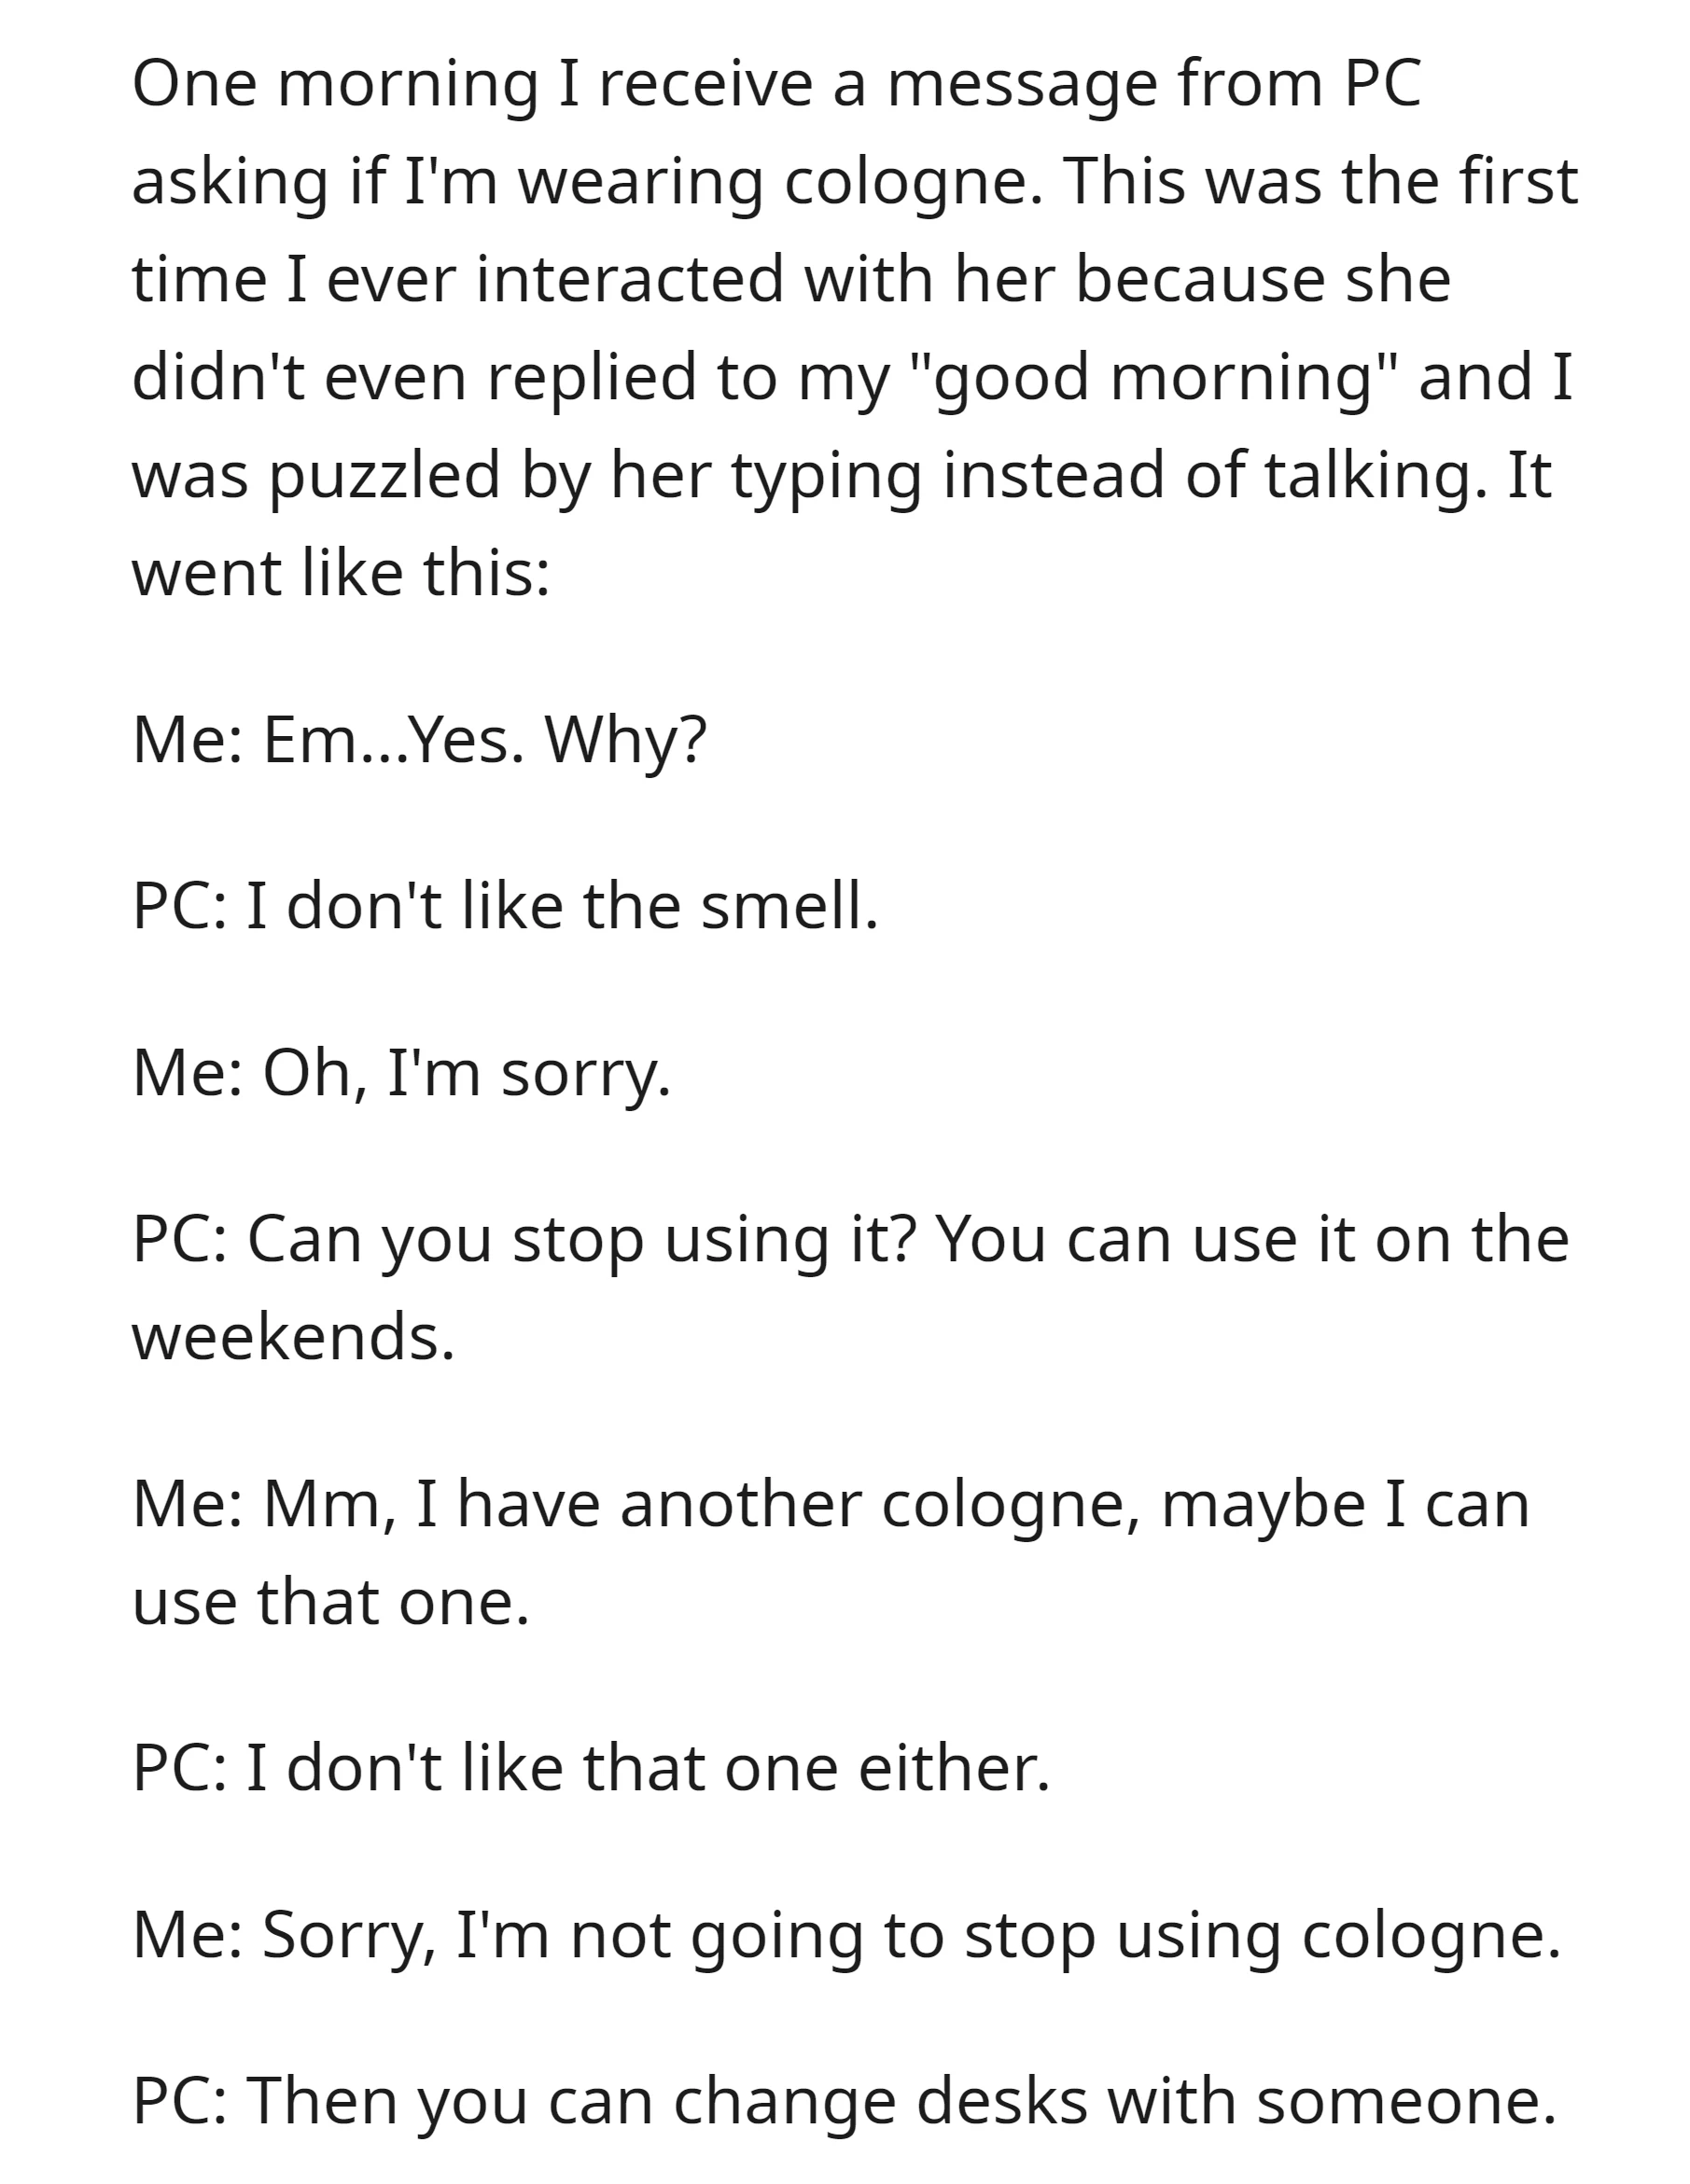 PC asked OP to stop wearing cologne due to its smell